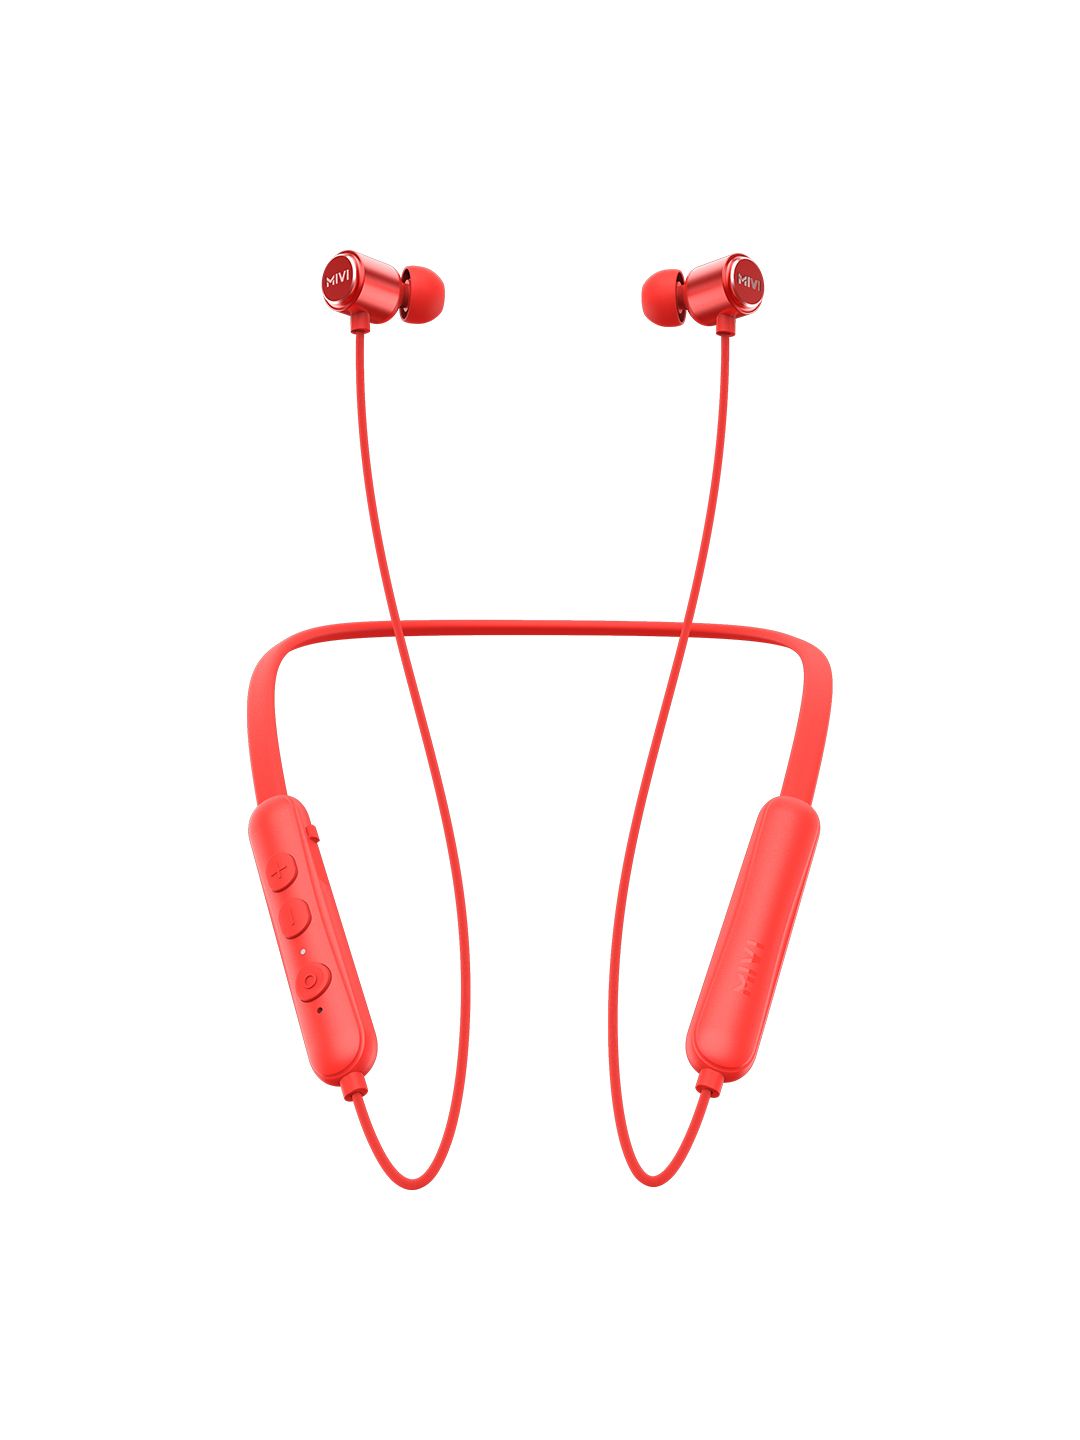 mivi Collar Flash Wireless Earphones with Mic & Fast Charging - Red Price in India